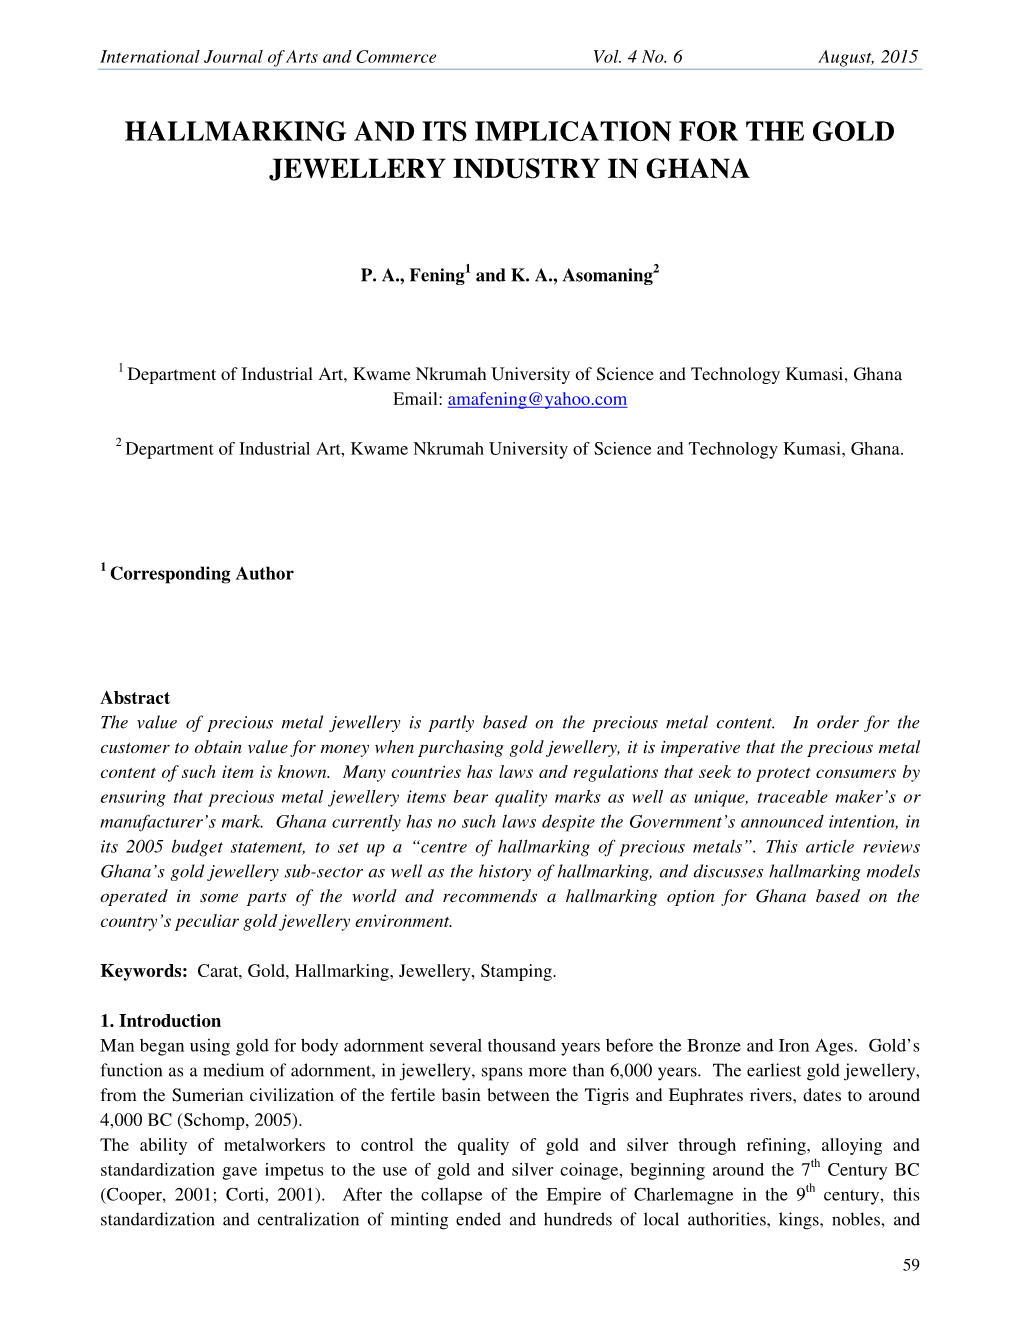 Hallmarking and Its Implication for the Gold Jewellery Industry in Ghana